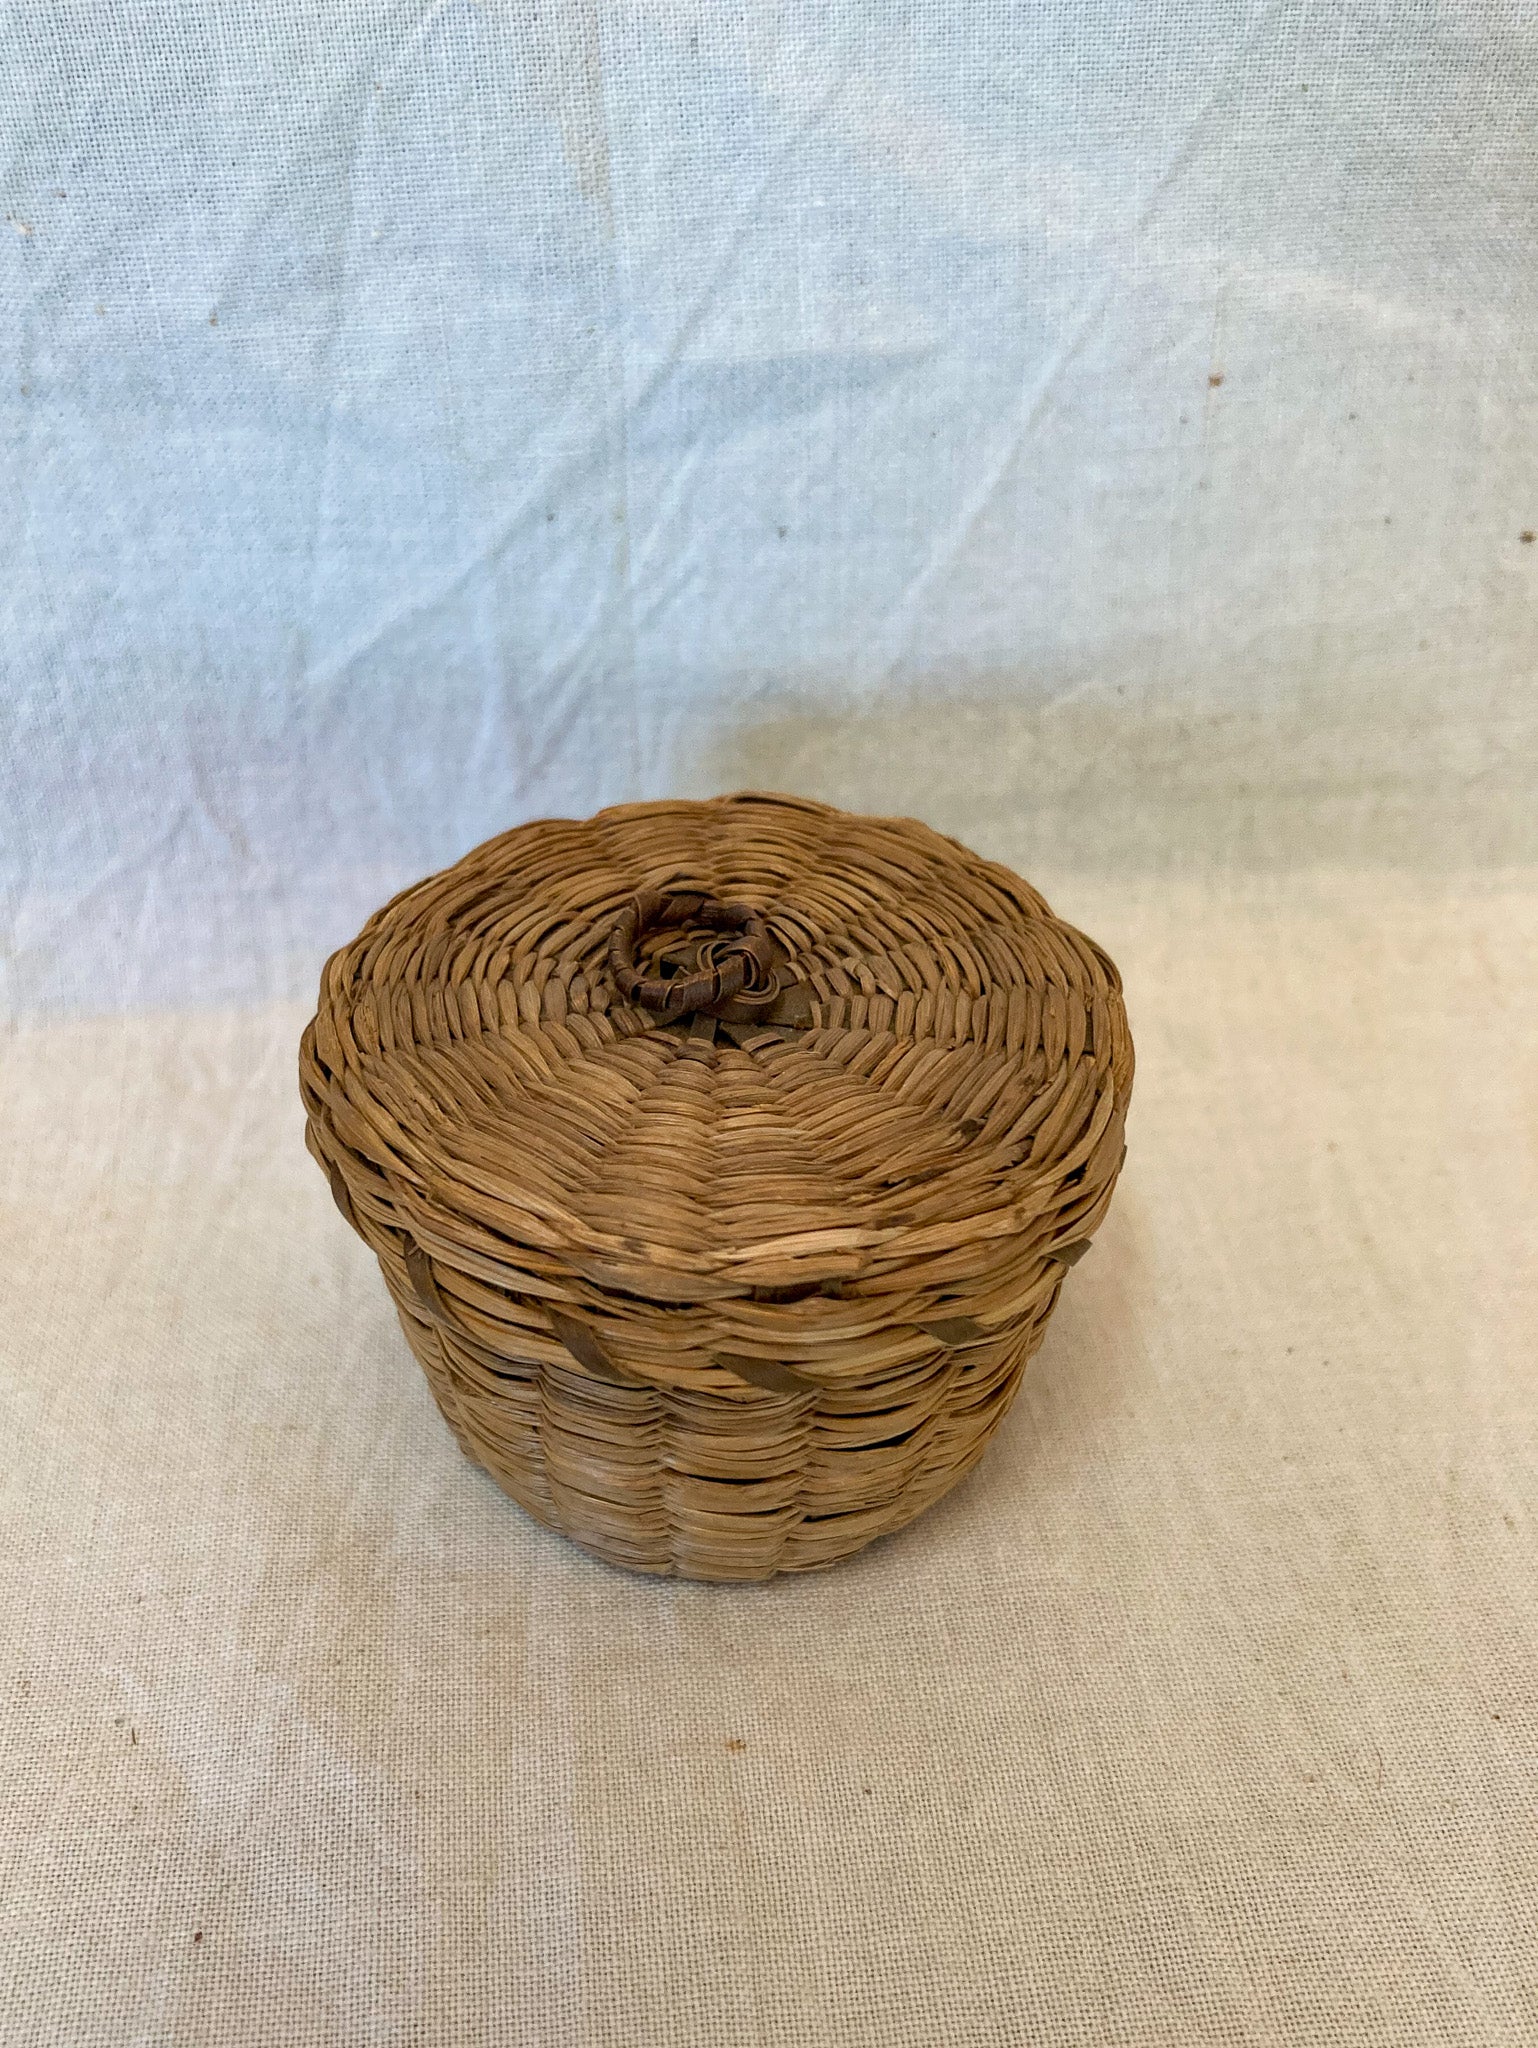 1910’s Tiny Woven Sweet Grass Basket and Crochet Hook Holder with Contents